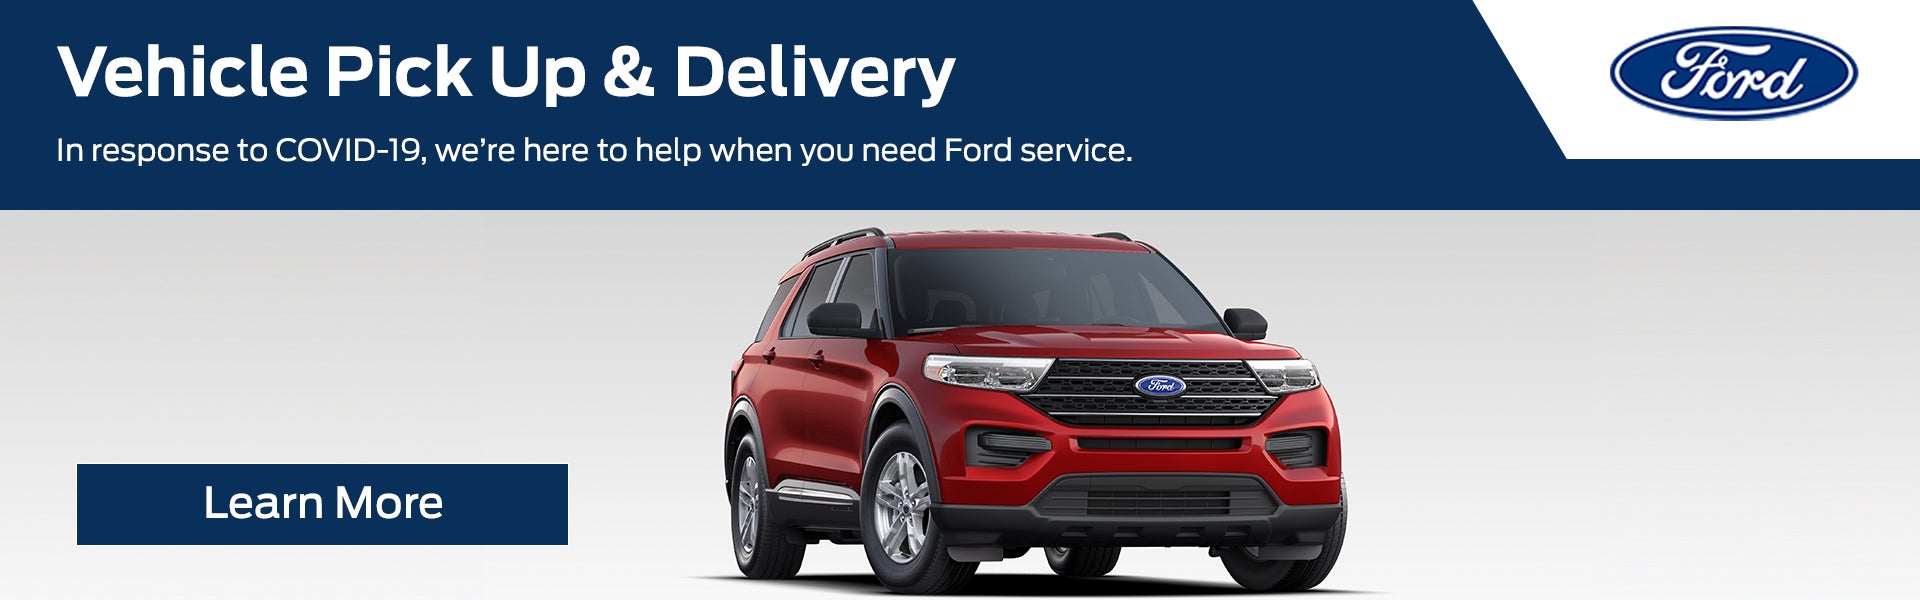 Ford Vehicle Pick Up and Delivery Service